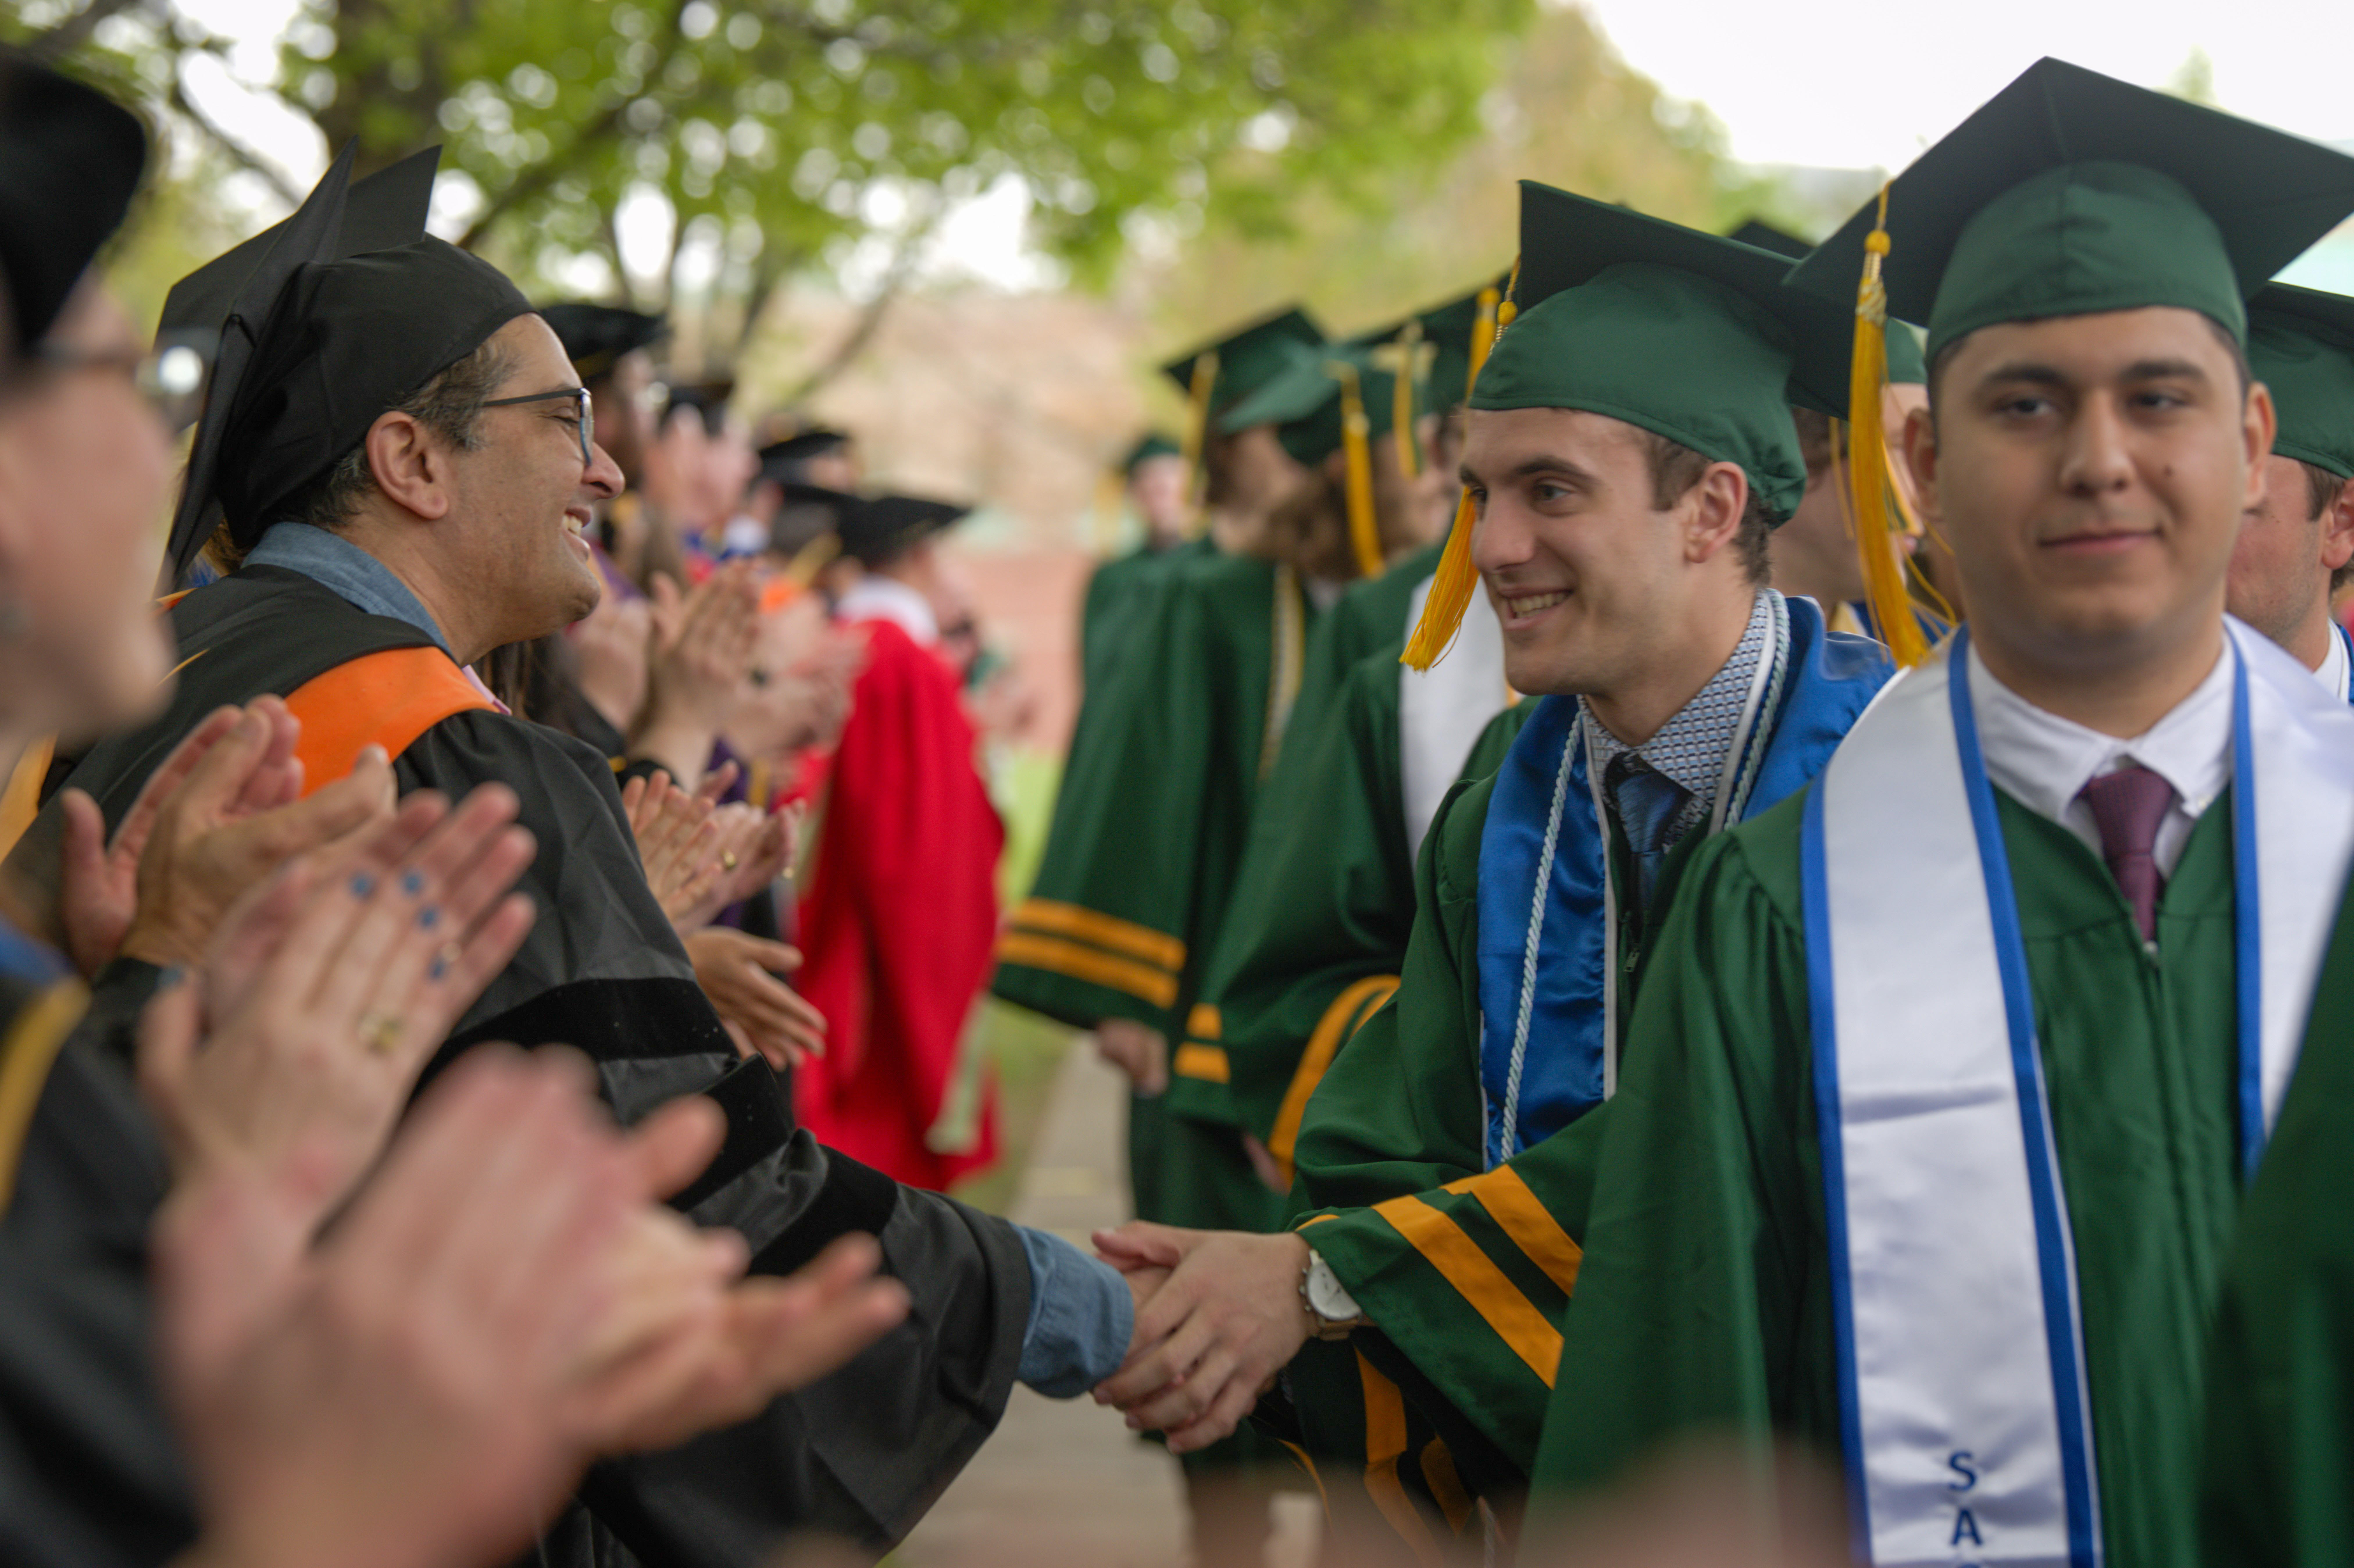 A student in regalia processing with peers shakes hands with a faculty member in regalia on as the students passes by applauding faculty